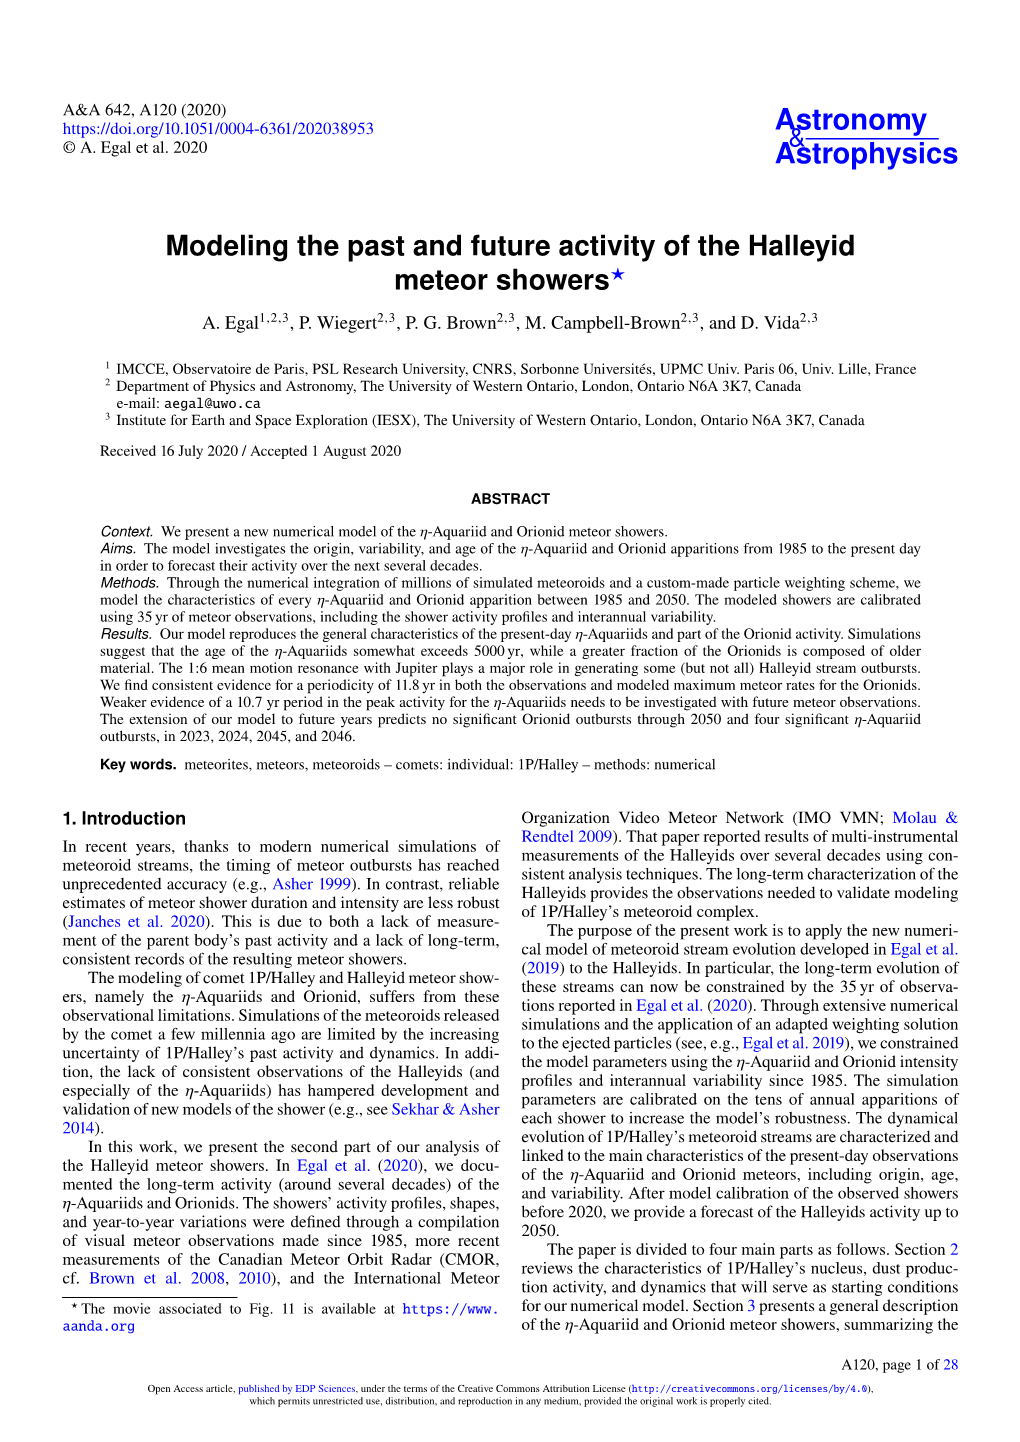 Modeling the Past and Future Activity of the Halleyid Meteor Showers? A